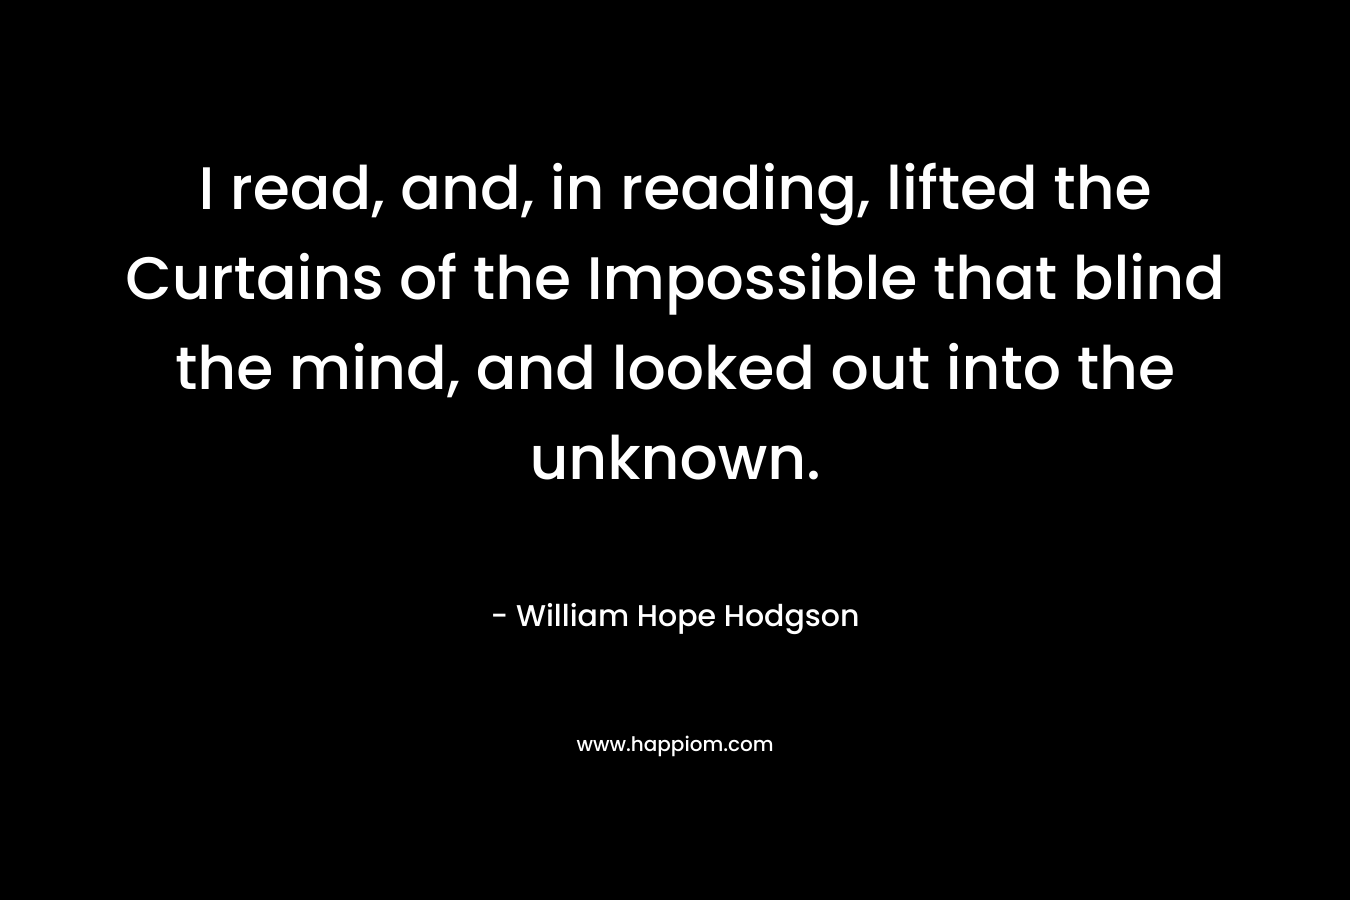 I read, and, in reading, lifted the Curtains of the Impossible that blind the mind, and looked out into the unknown.